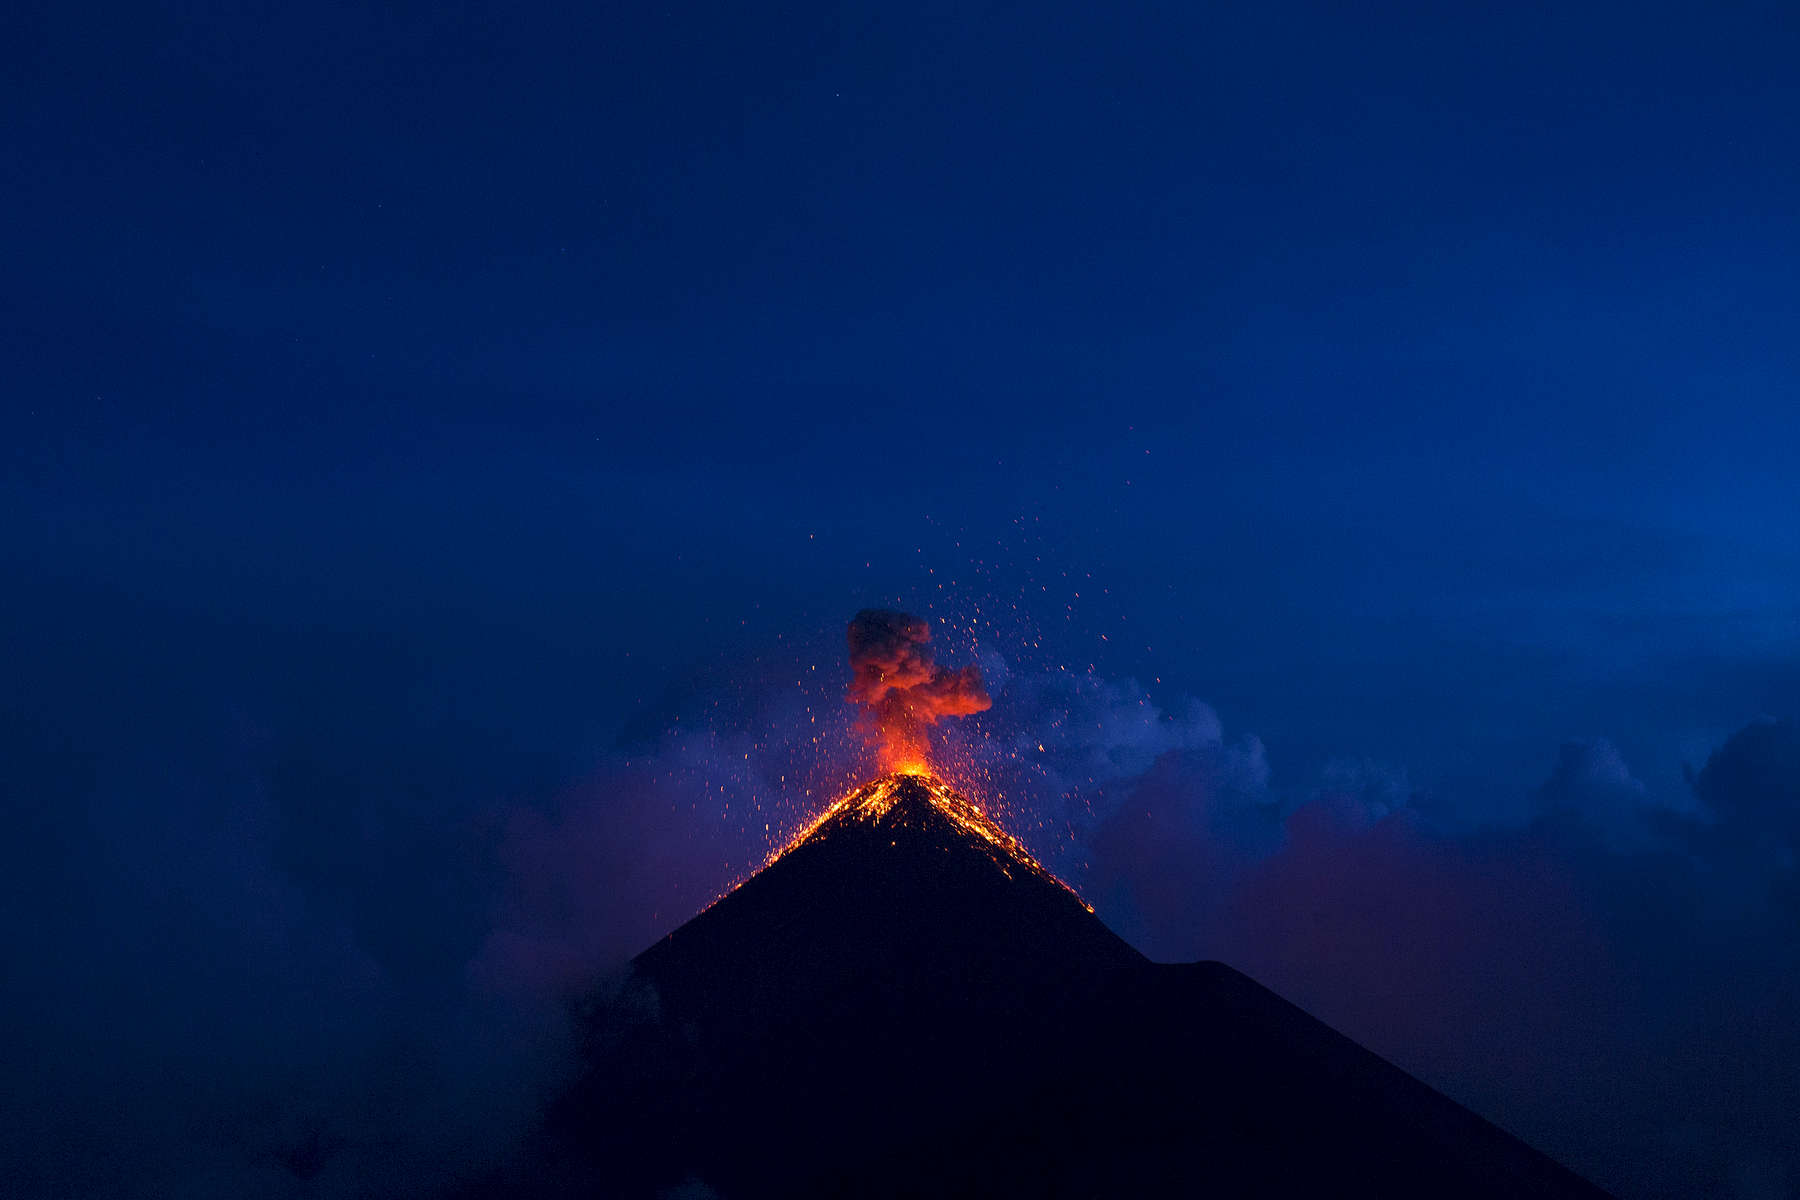 Volcano Fuego makes an eruption just one month before the eruption that killed dozens.